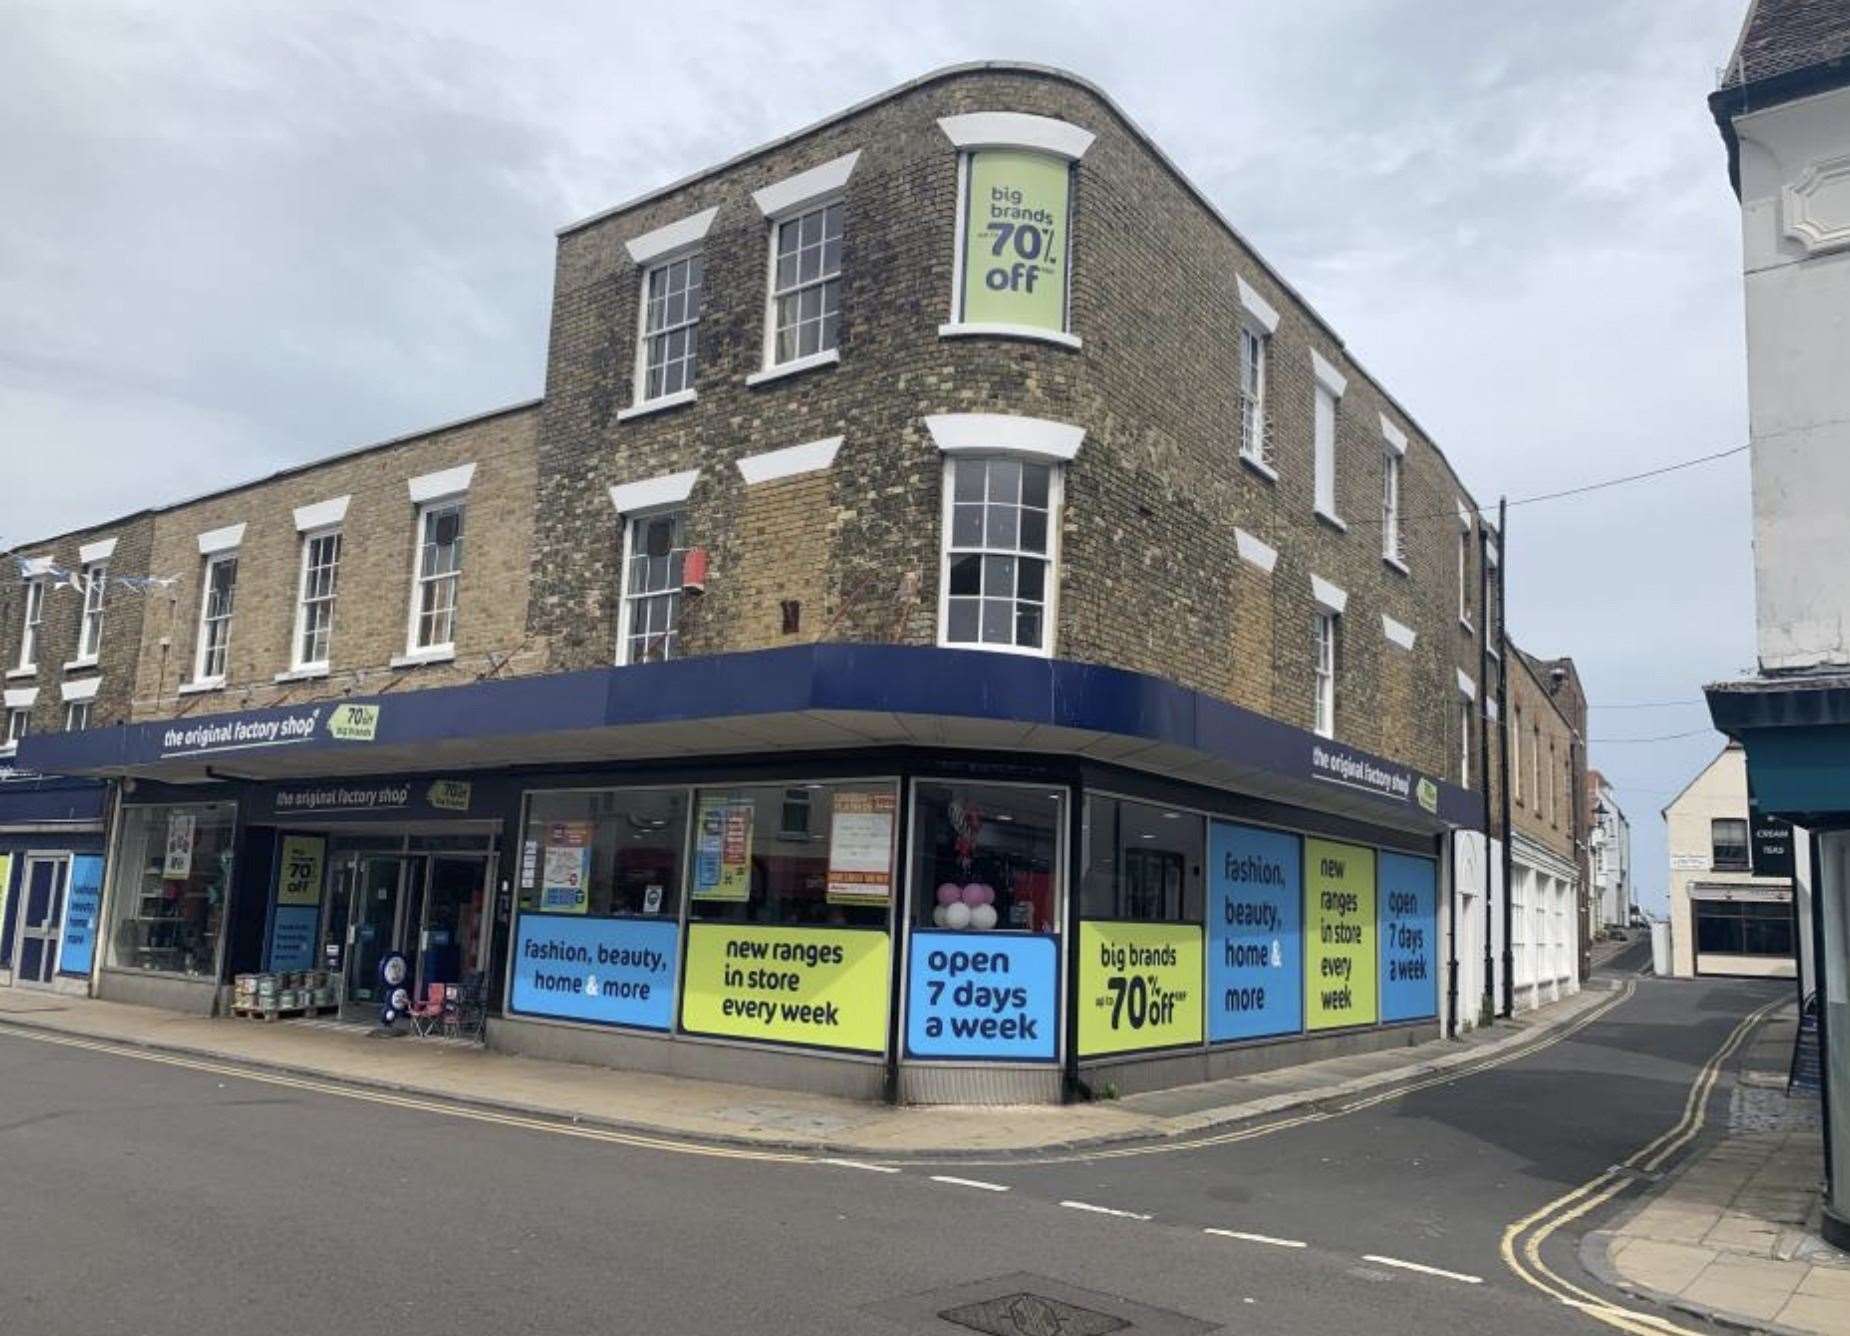 The Original Factory Shop on Deal High Street would be turned into a number of separate shops under the plans. Picture: Planning portal